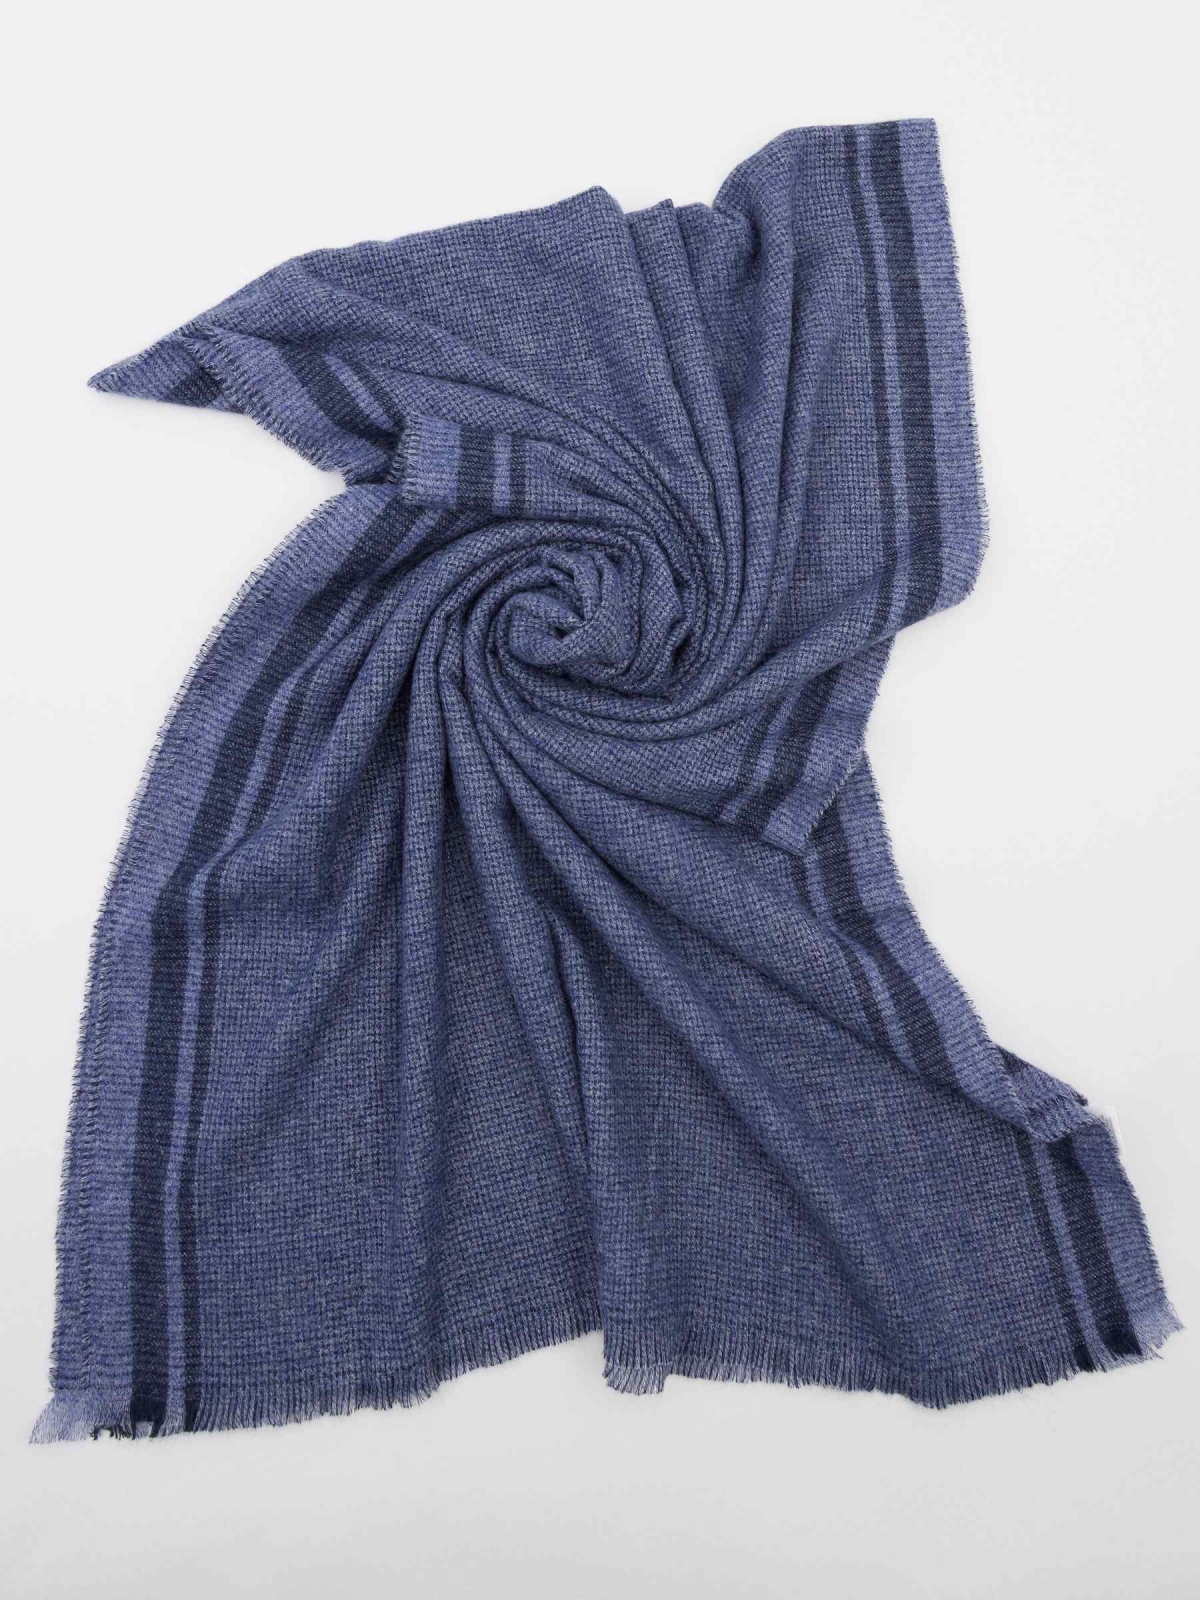 Men's scarf folded view